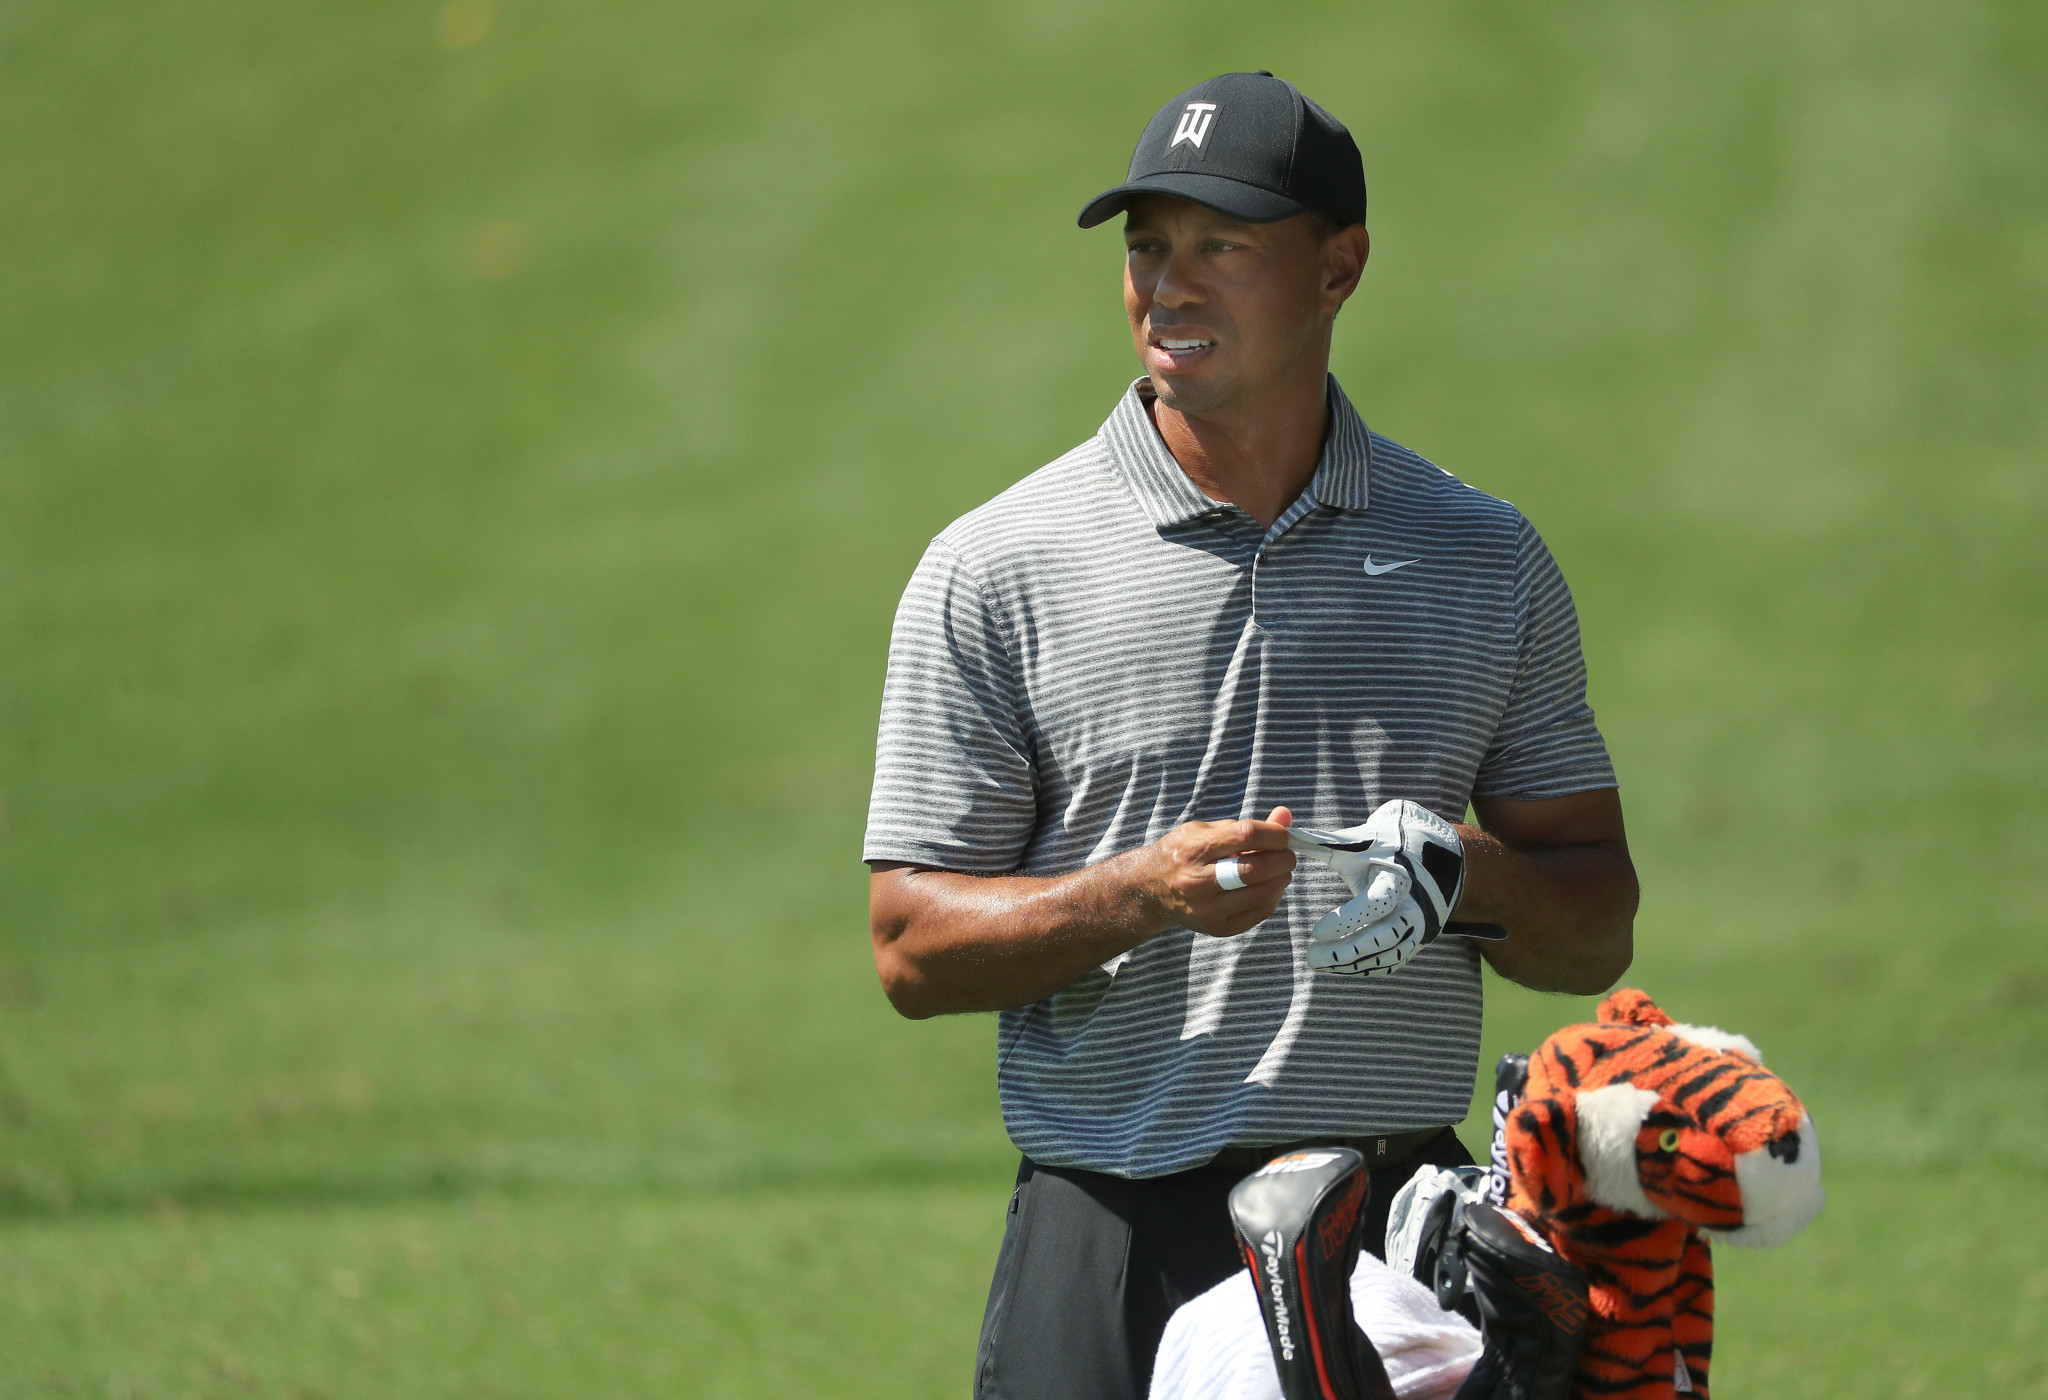 Tiger Woods will be aiming to end his 10-year drought in the majors when he competes at The Masters at Augusta National Golf Club this week ©Getty Images